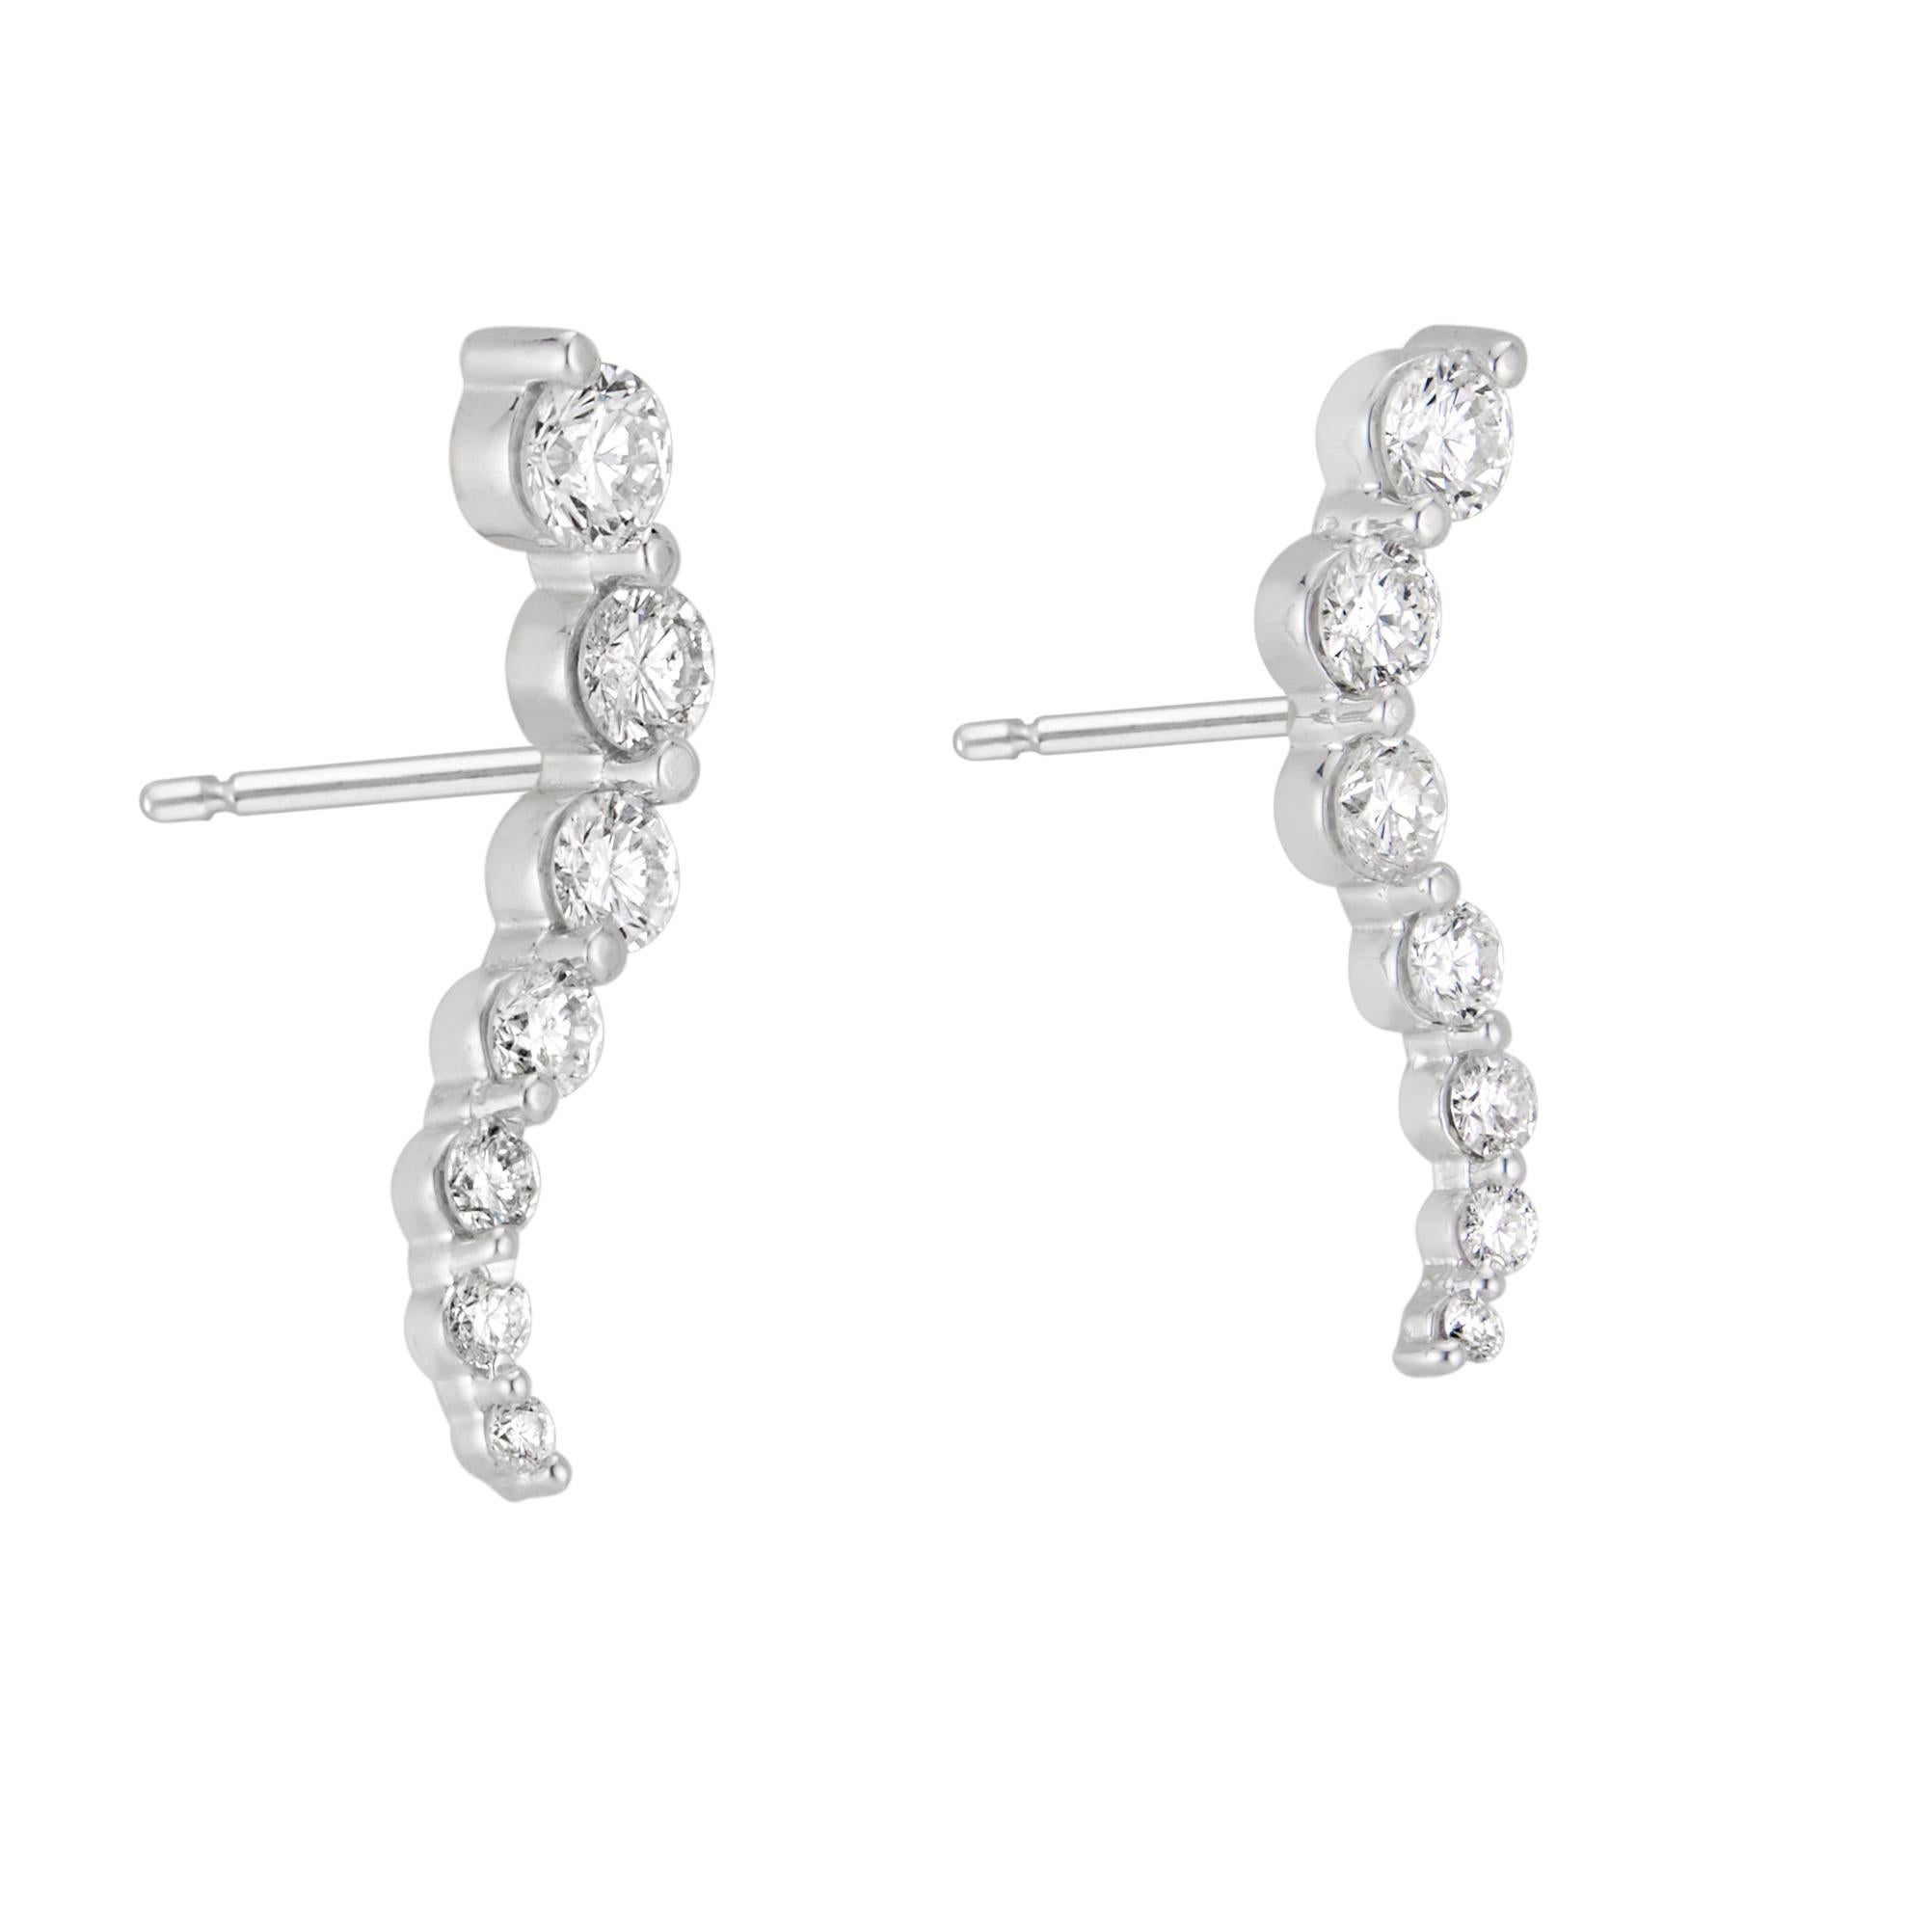 Journey style 14k white gold earrings. 14 round brilliant cut diamonds, .80 total carats. 

14 round brilliant cut diamonds, G-H VS-SI approx. .80cts
14k white gold 
Stamped: 585
2.2 grams
Top to bottom: 20.6mm or .81 inches
Width: 5.4mm or 1/5